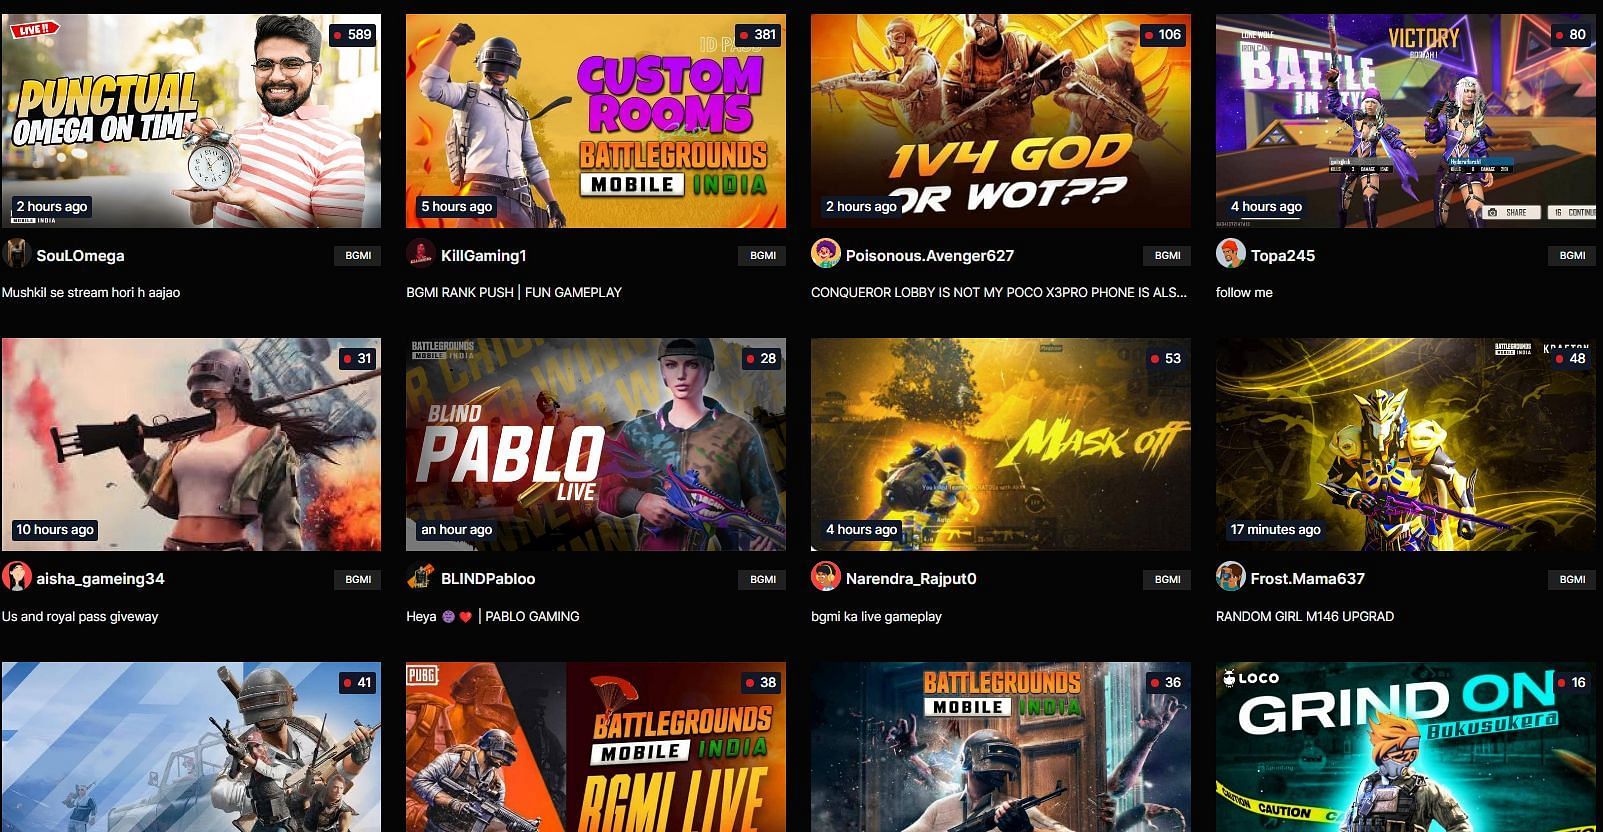 One can connect with top gamers via live streams (Image via Loco.gg)